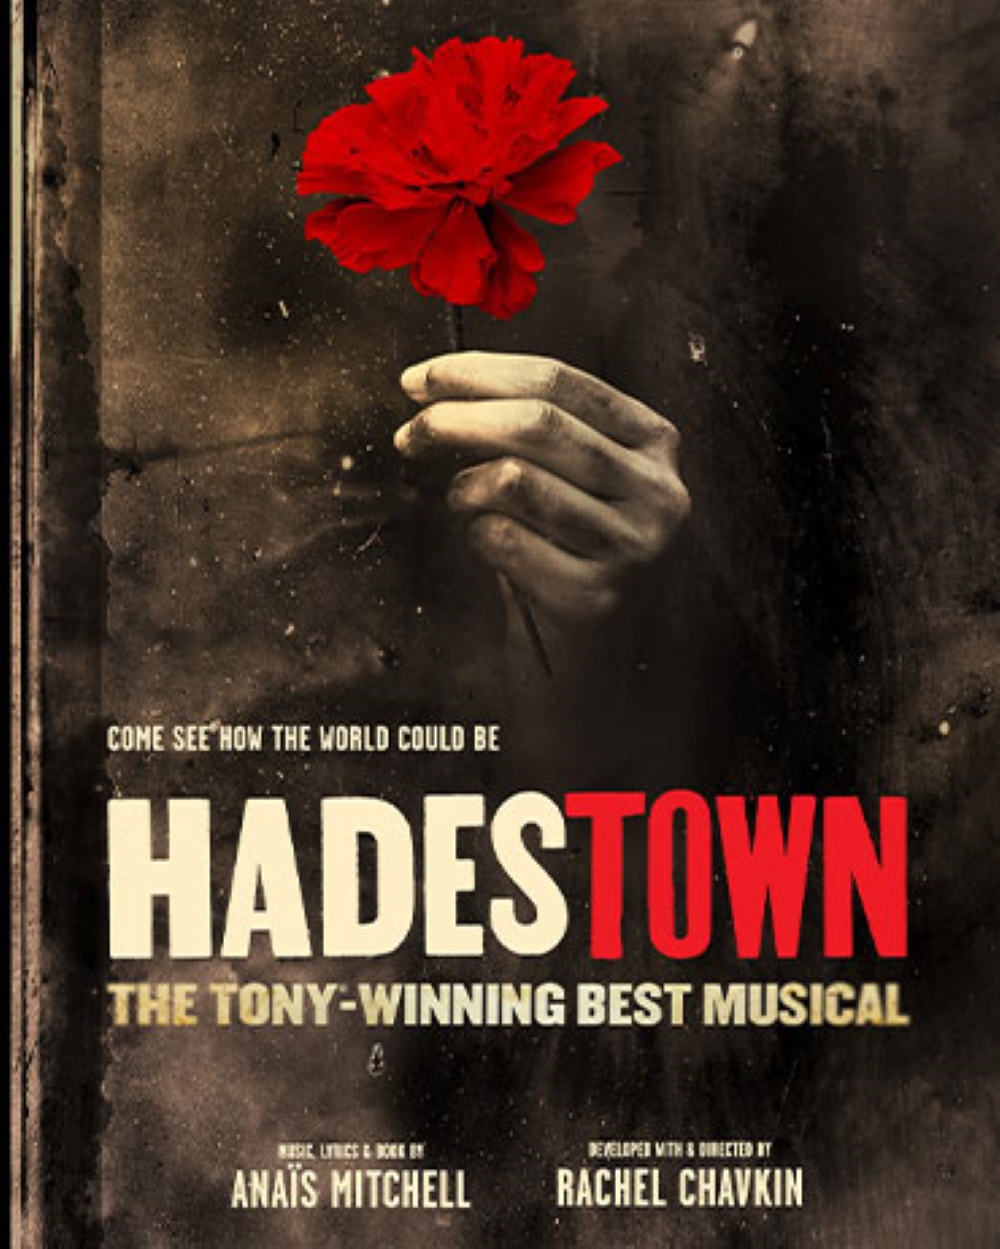 The logo for the musical "Hadestown."